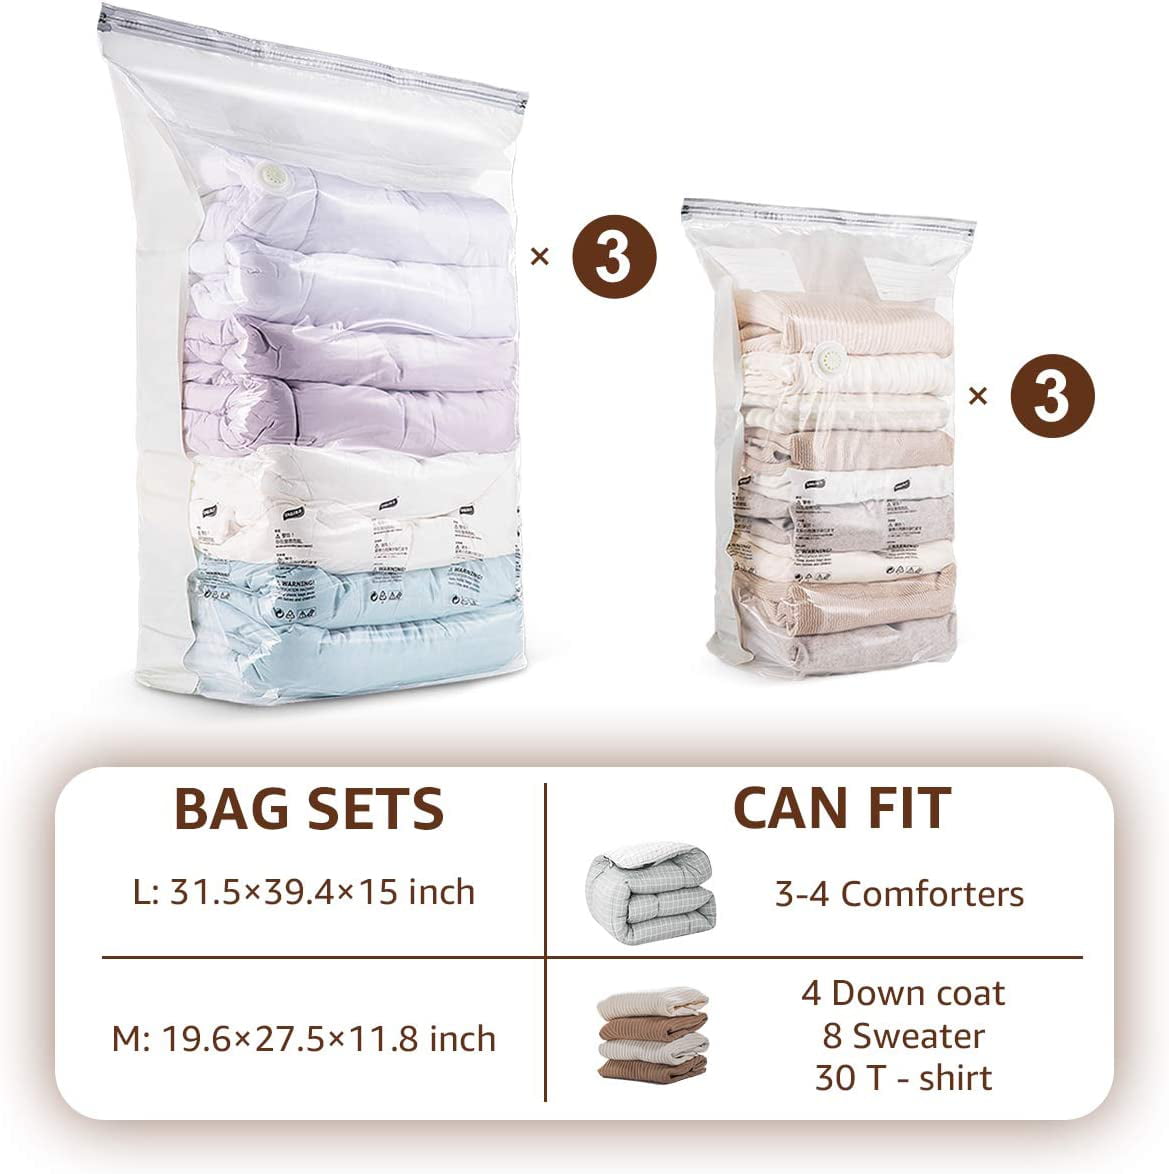 TAILI Jumbo Size Cube Vacuum Storage Bags for Clothes, Shrink